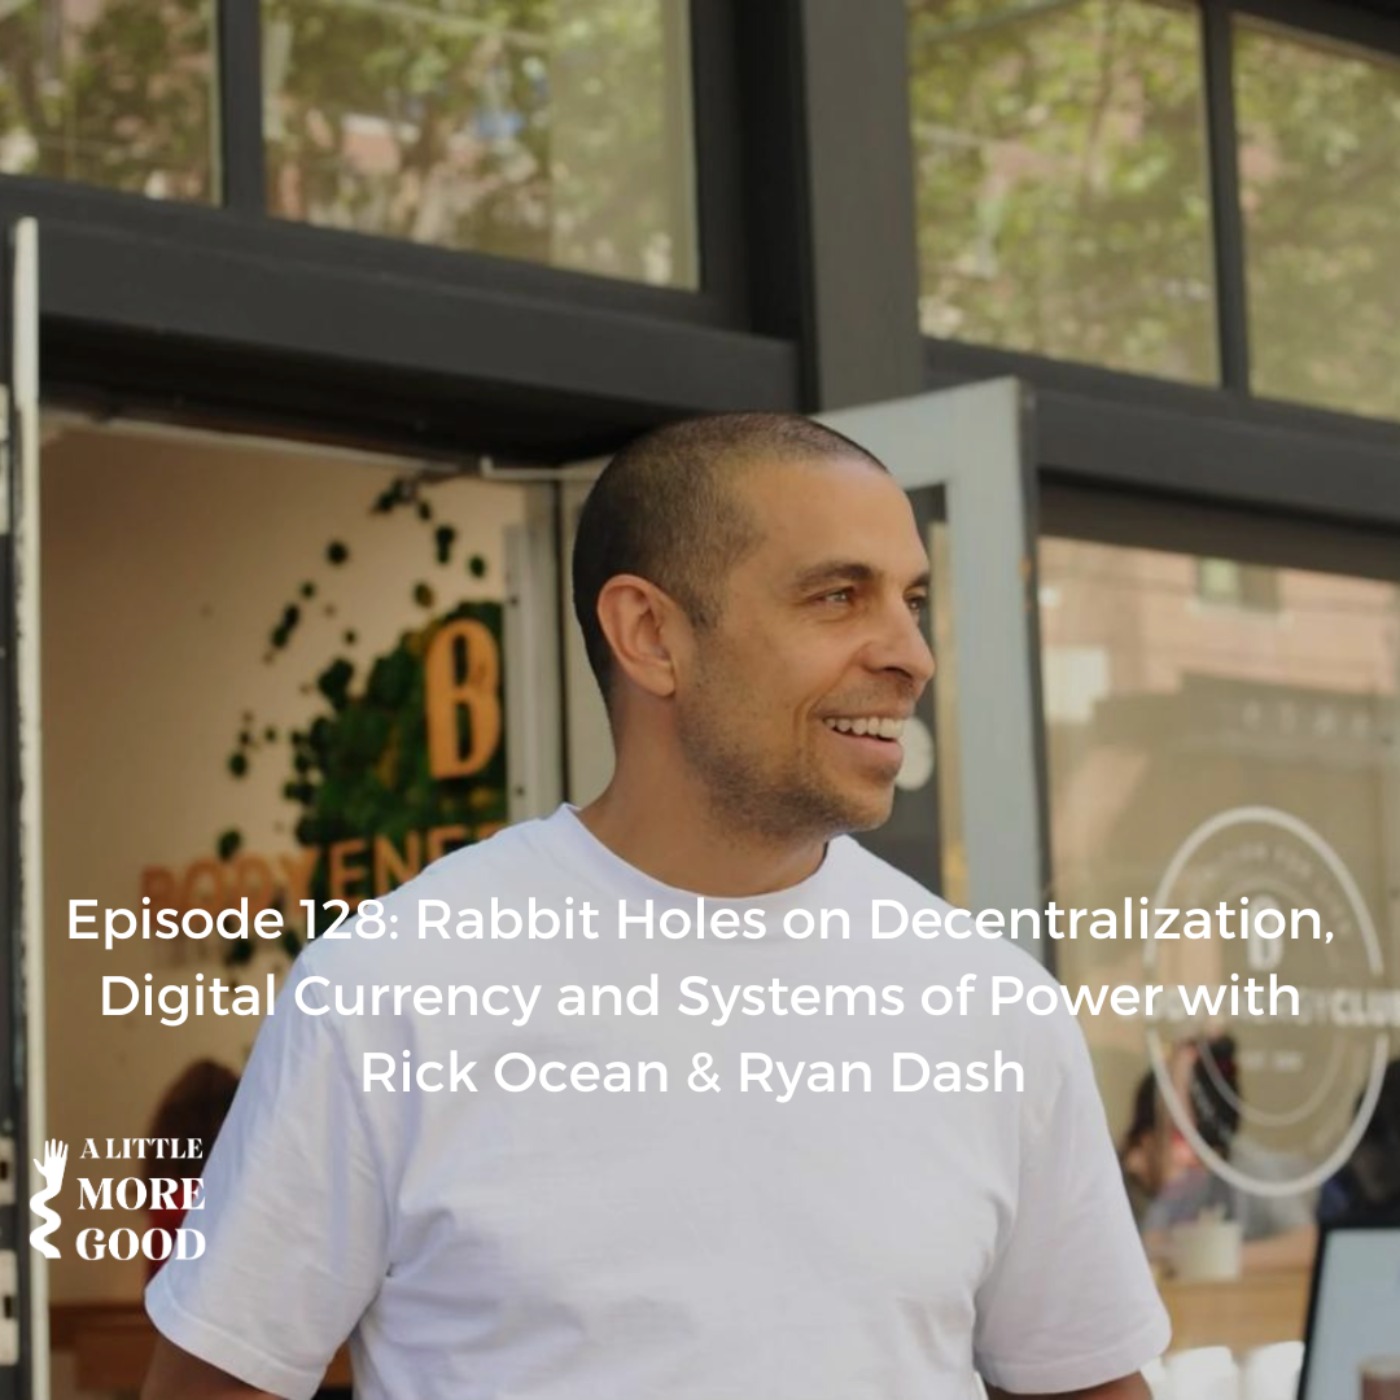 Rabbit Holes on Decentralization, Digital Currency and Systems of Power with Rick Ocean & Ryan Dash